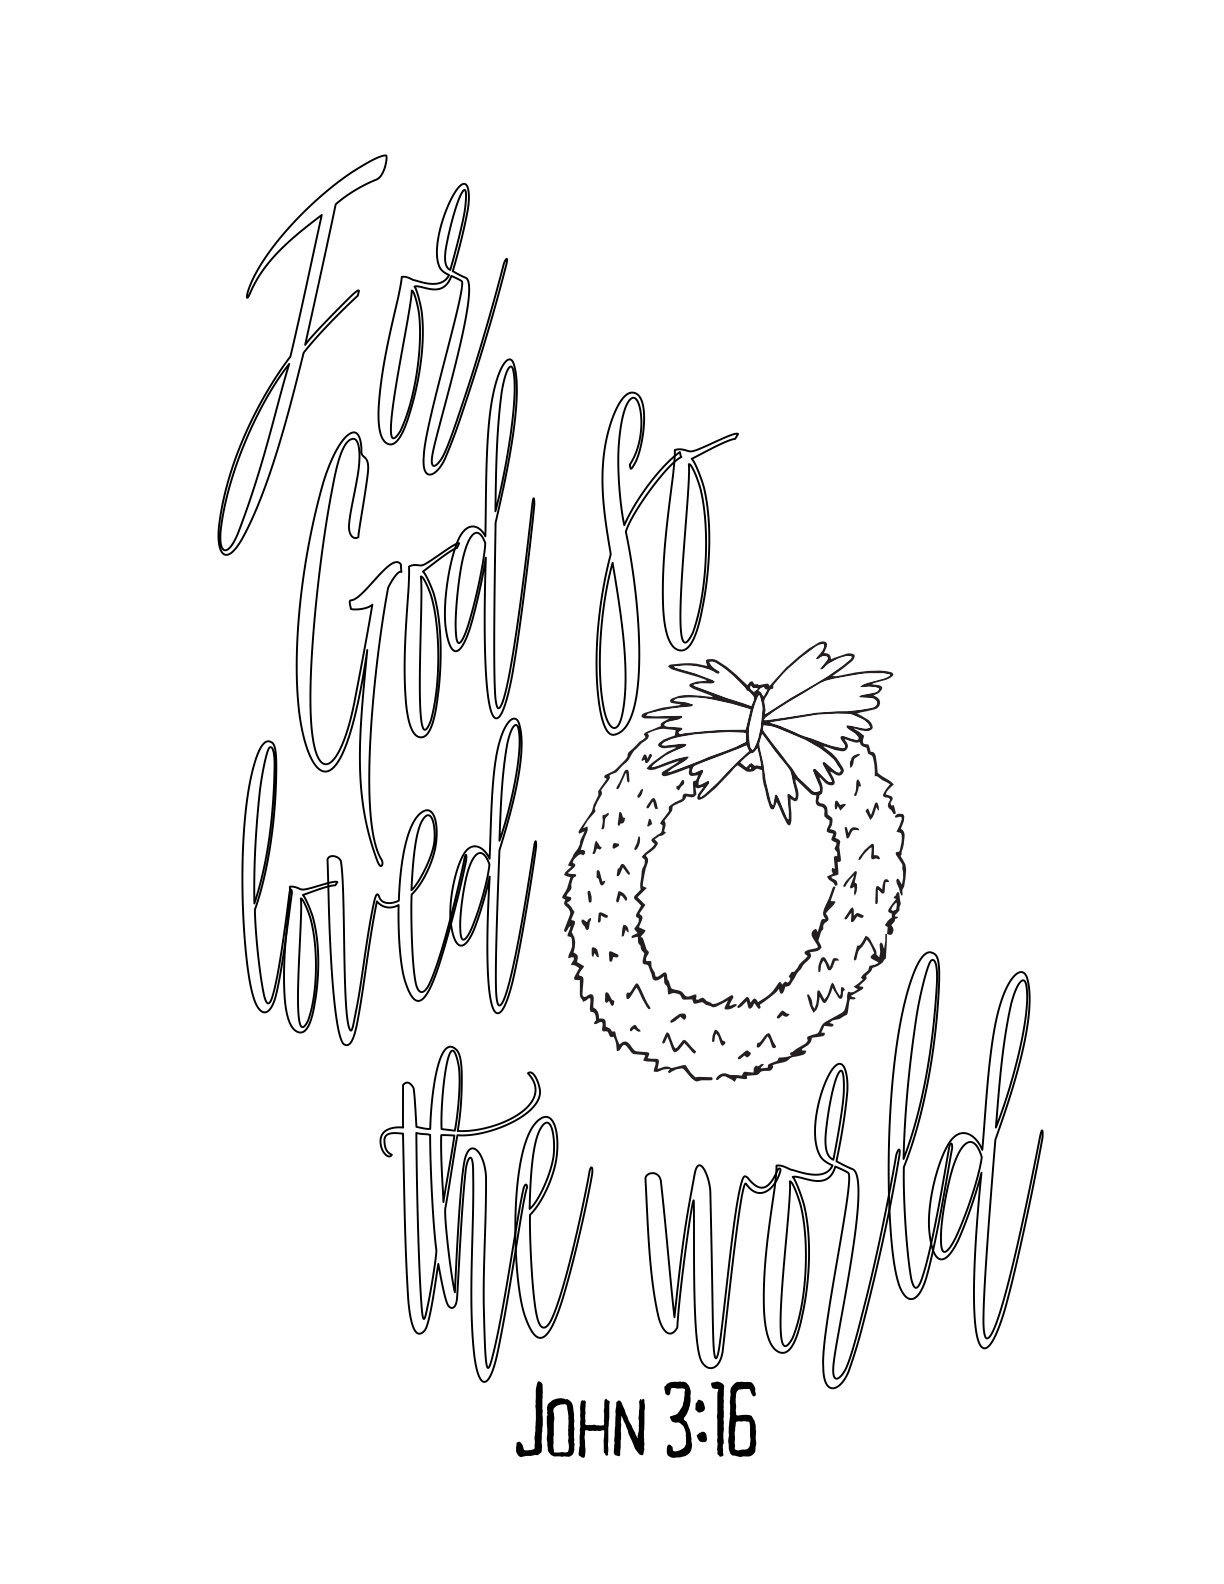 Free Simple Advent Coloring Page - For God So Loved The World - John 3:16CLICK HERE TO DOWNLOAD THIS FREE PRINTABLE CHRISTMAS COLORING PAGE